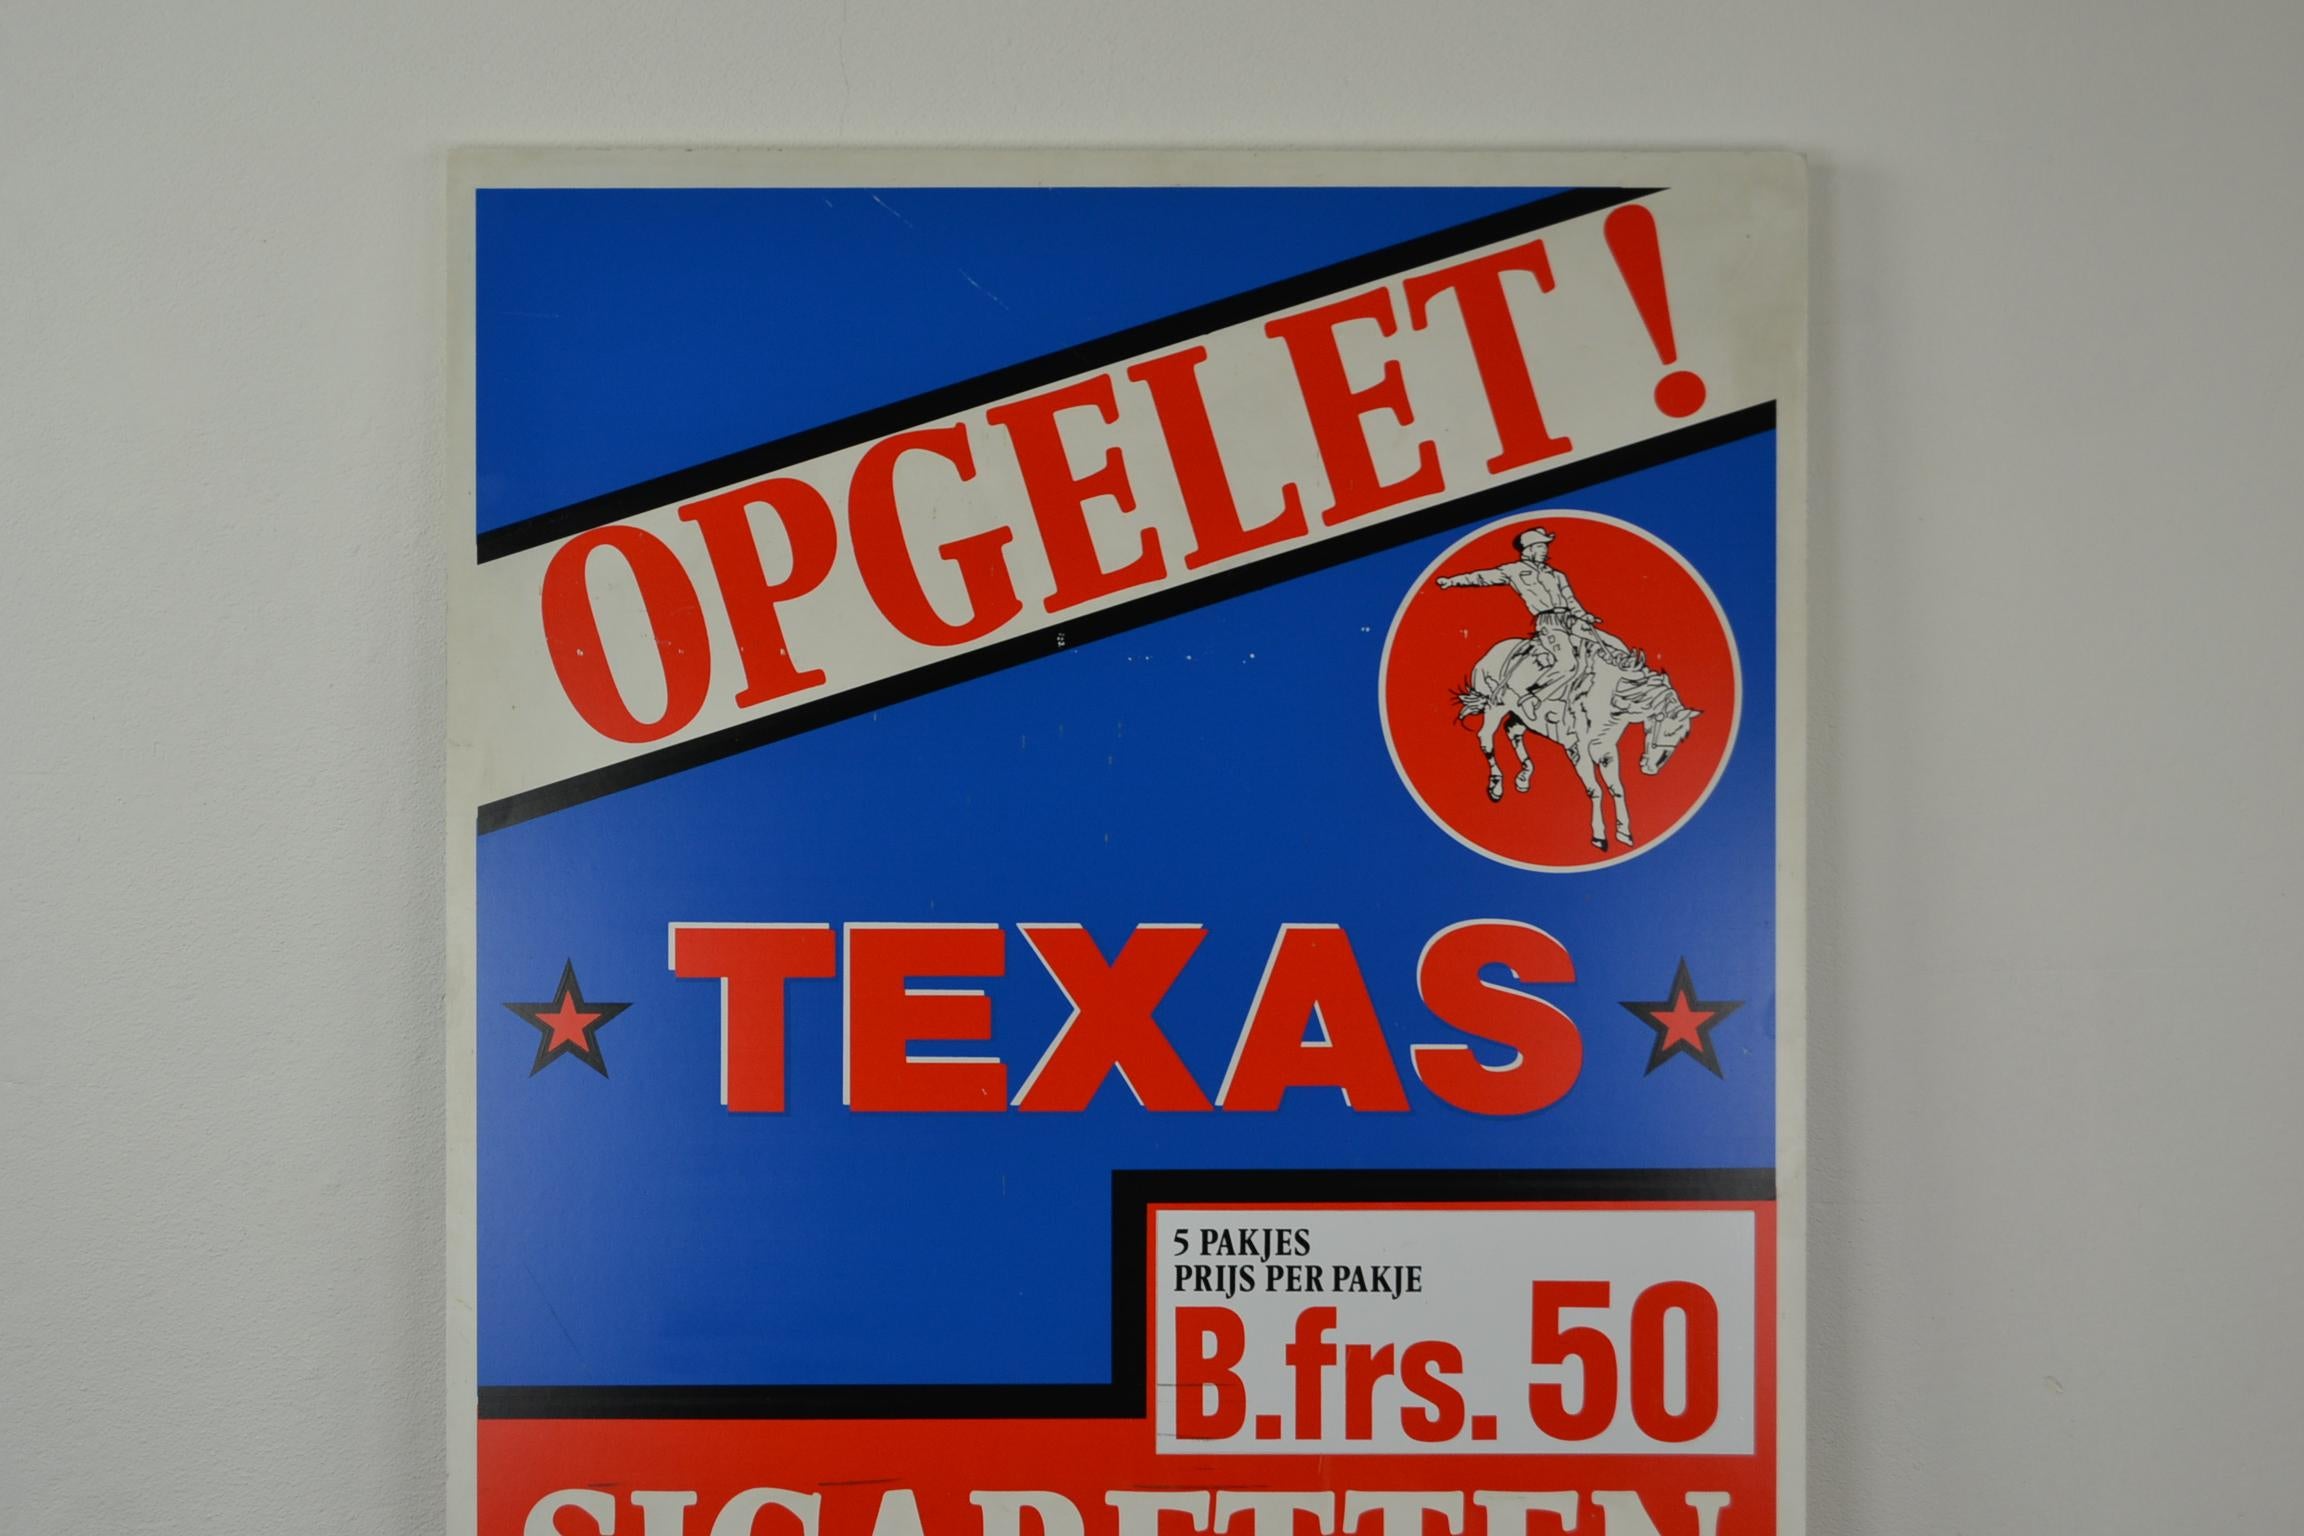 Colorful double sided sign for Texas cigarettes. 
A large red and blue advertising sign - billboard with a logo of a Texas cowboy on a horse. This publicity sign was probably used as a sidewalk sign. 

This vintage tobacco sign is decorative.